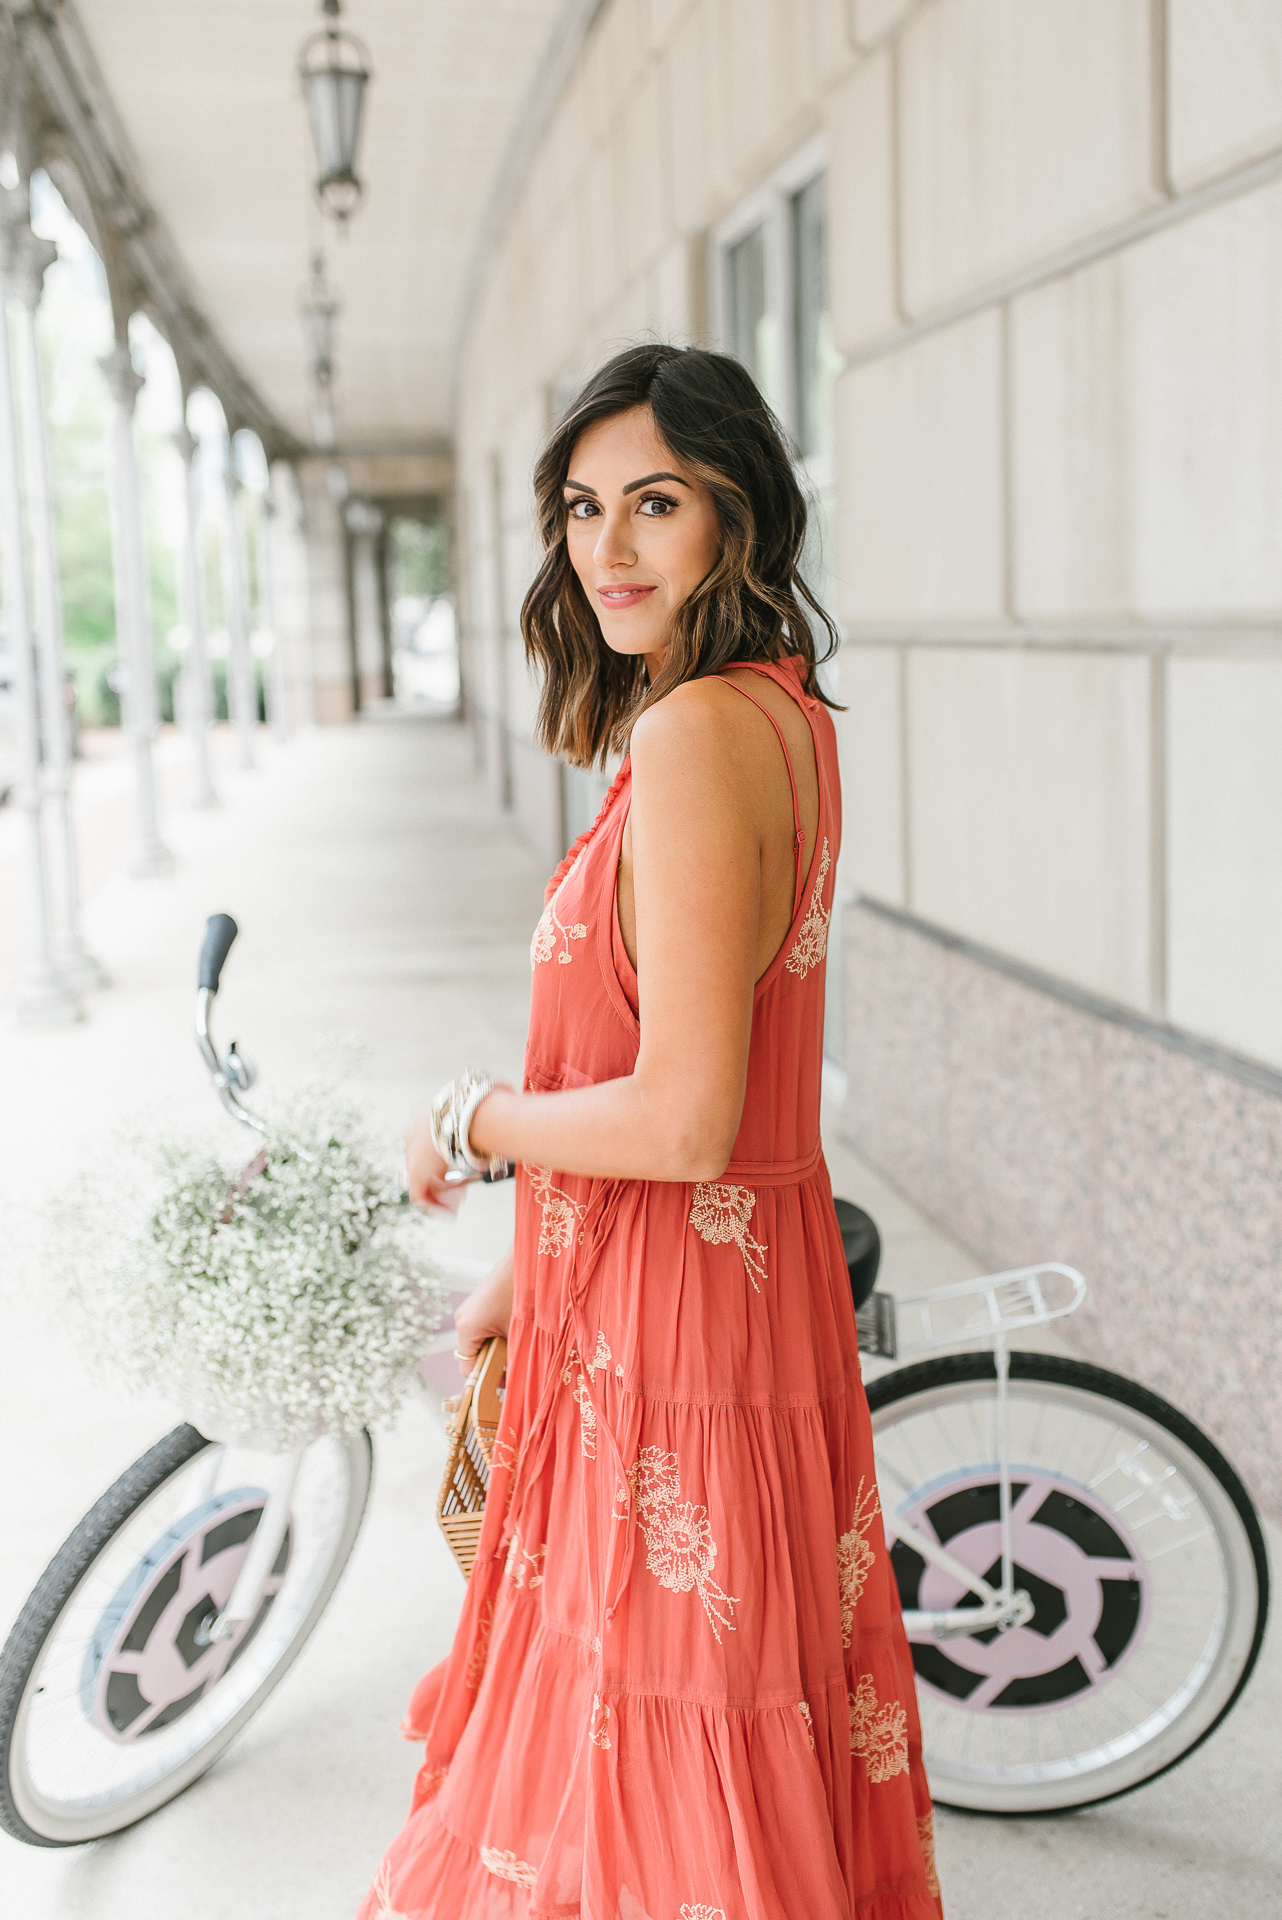 The Free People Showstopper Dress - STYLETHEGIRL